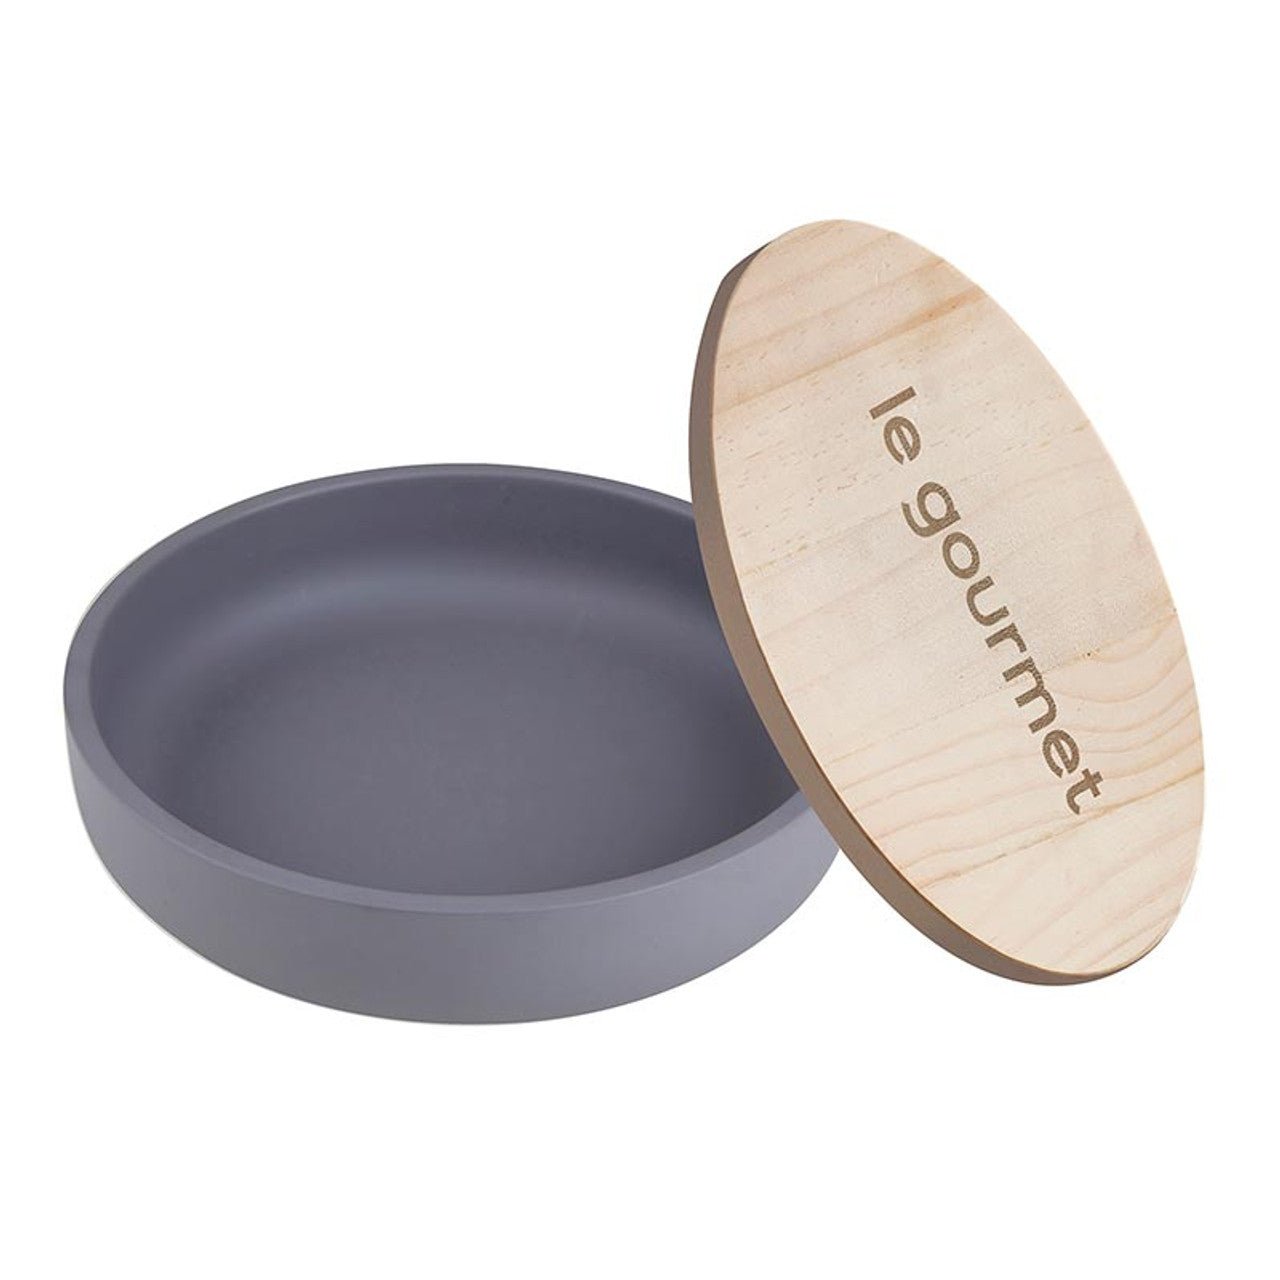 Le Gourmet Dark Grey Cement Serving Bowl with Wood Lid